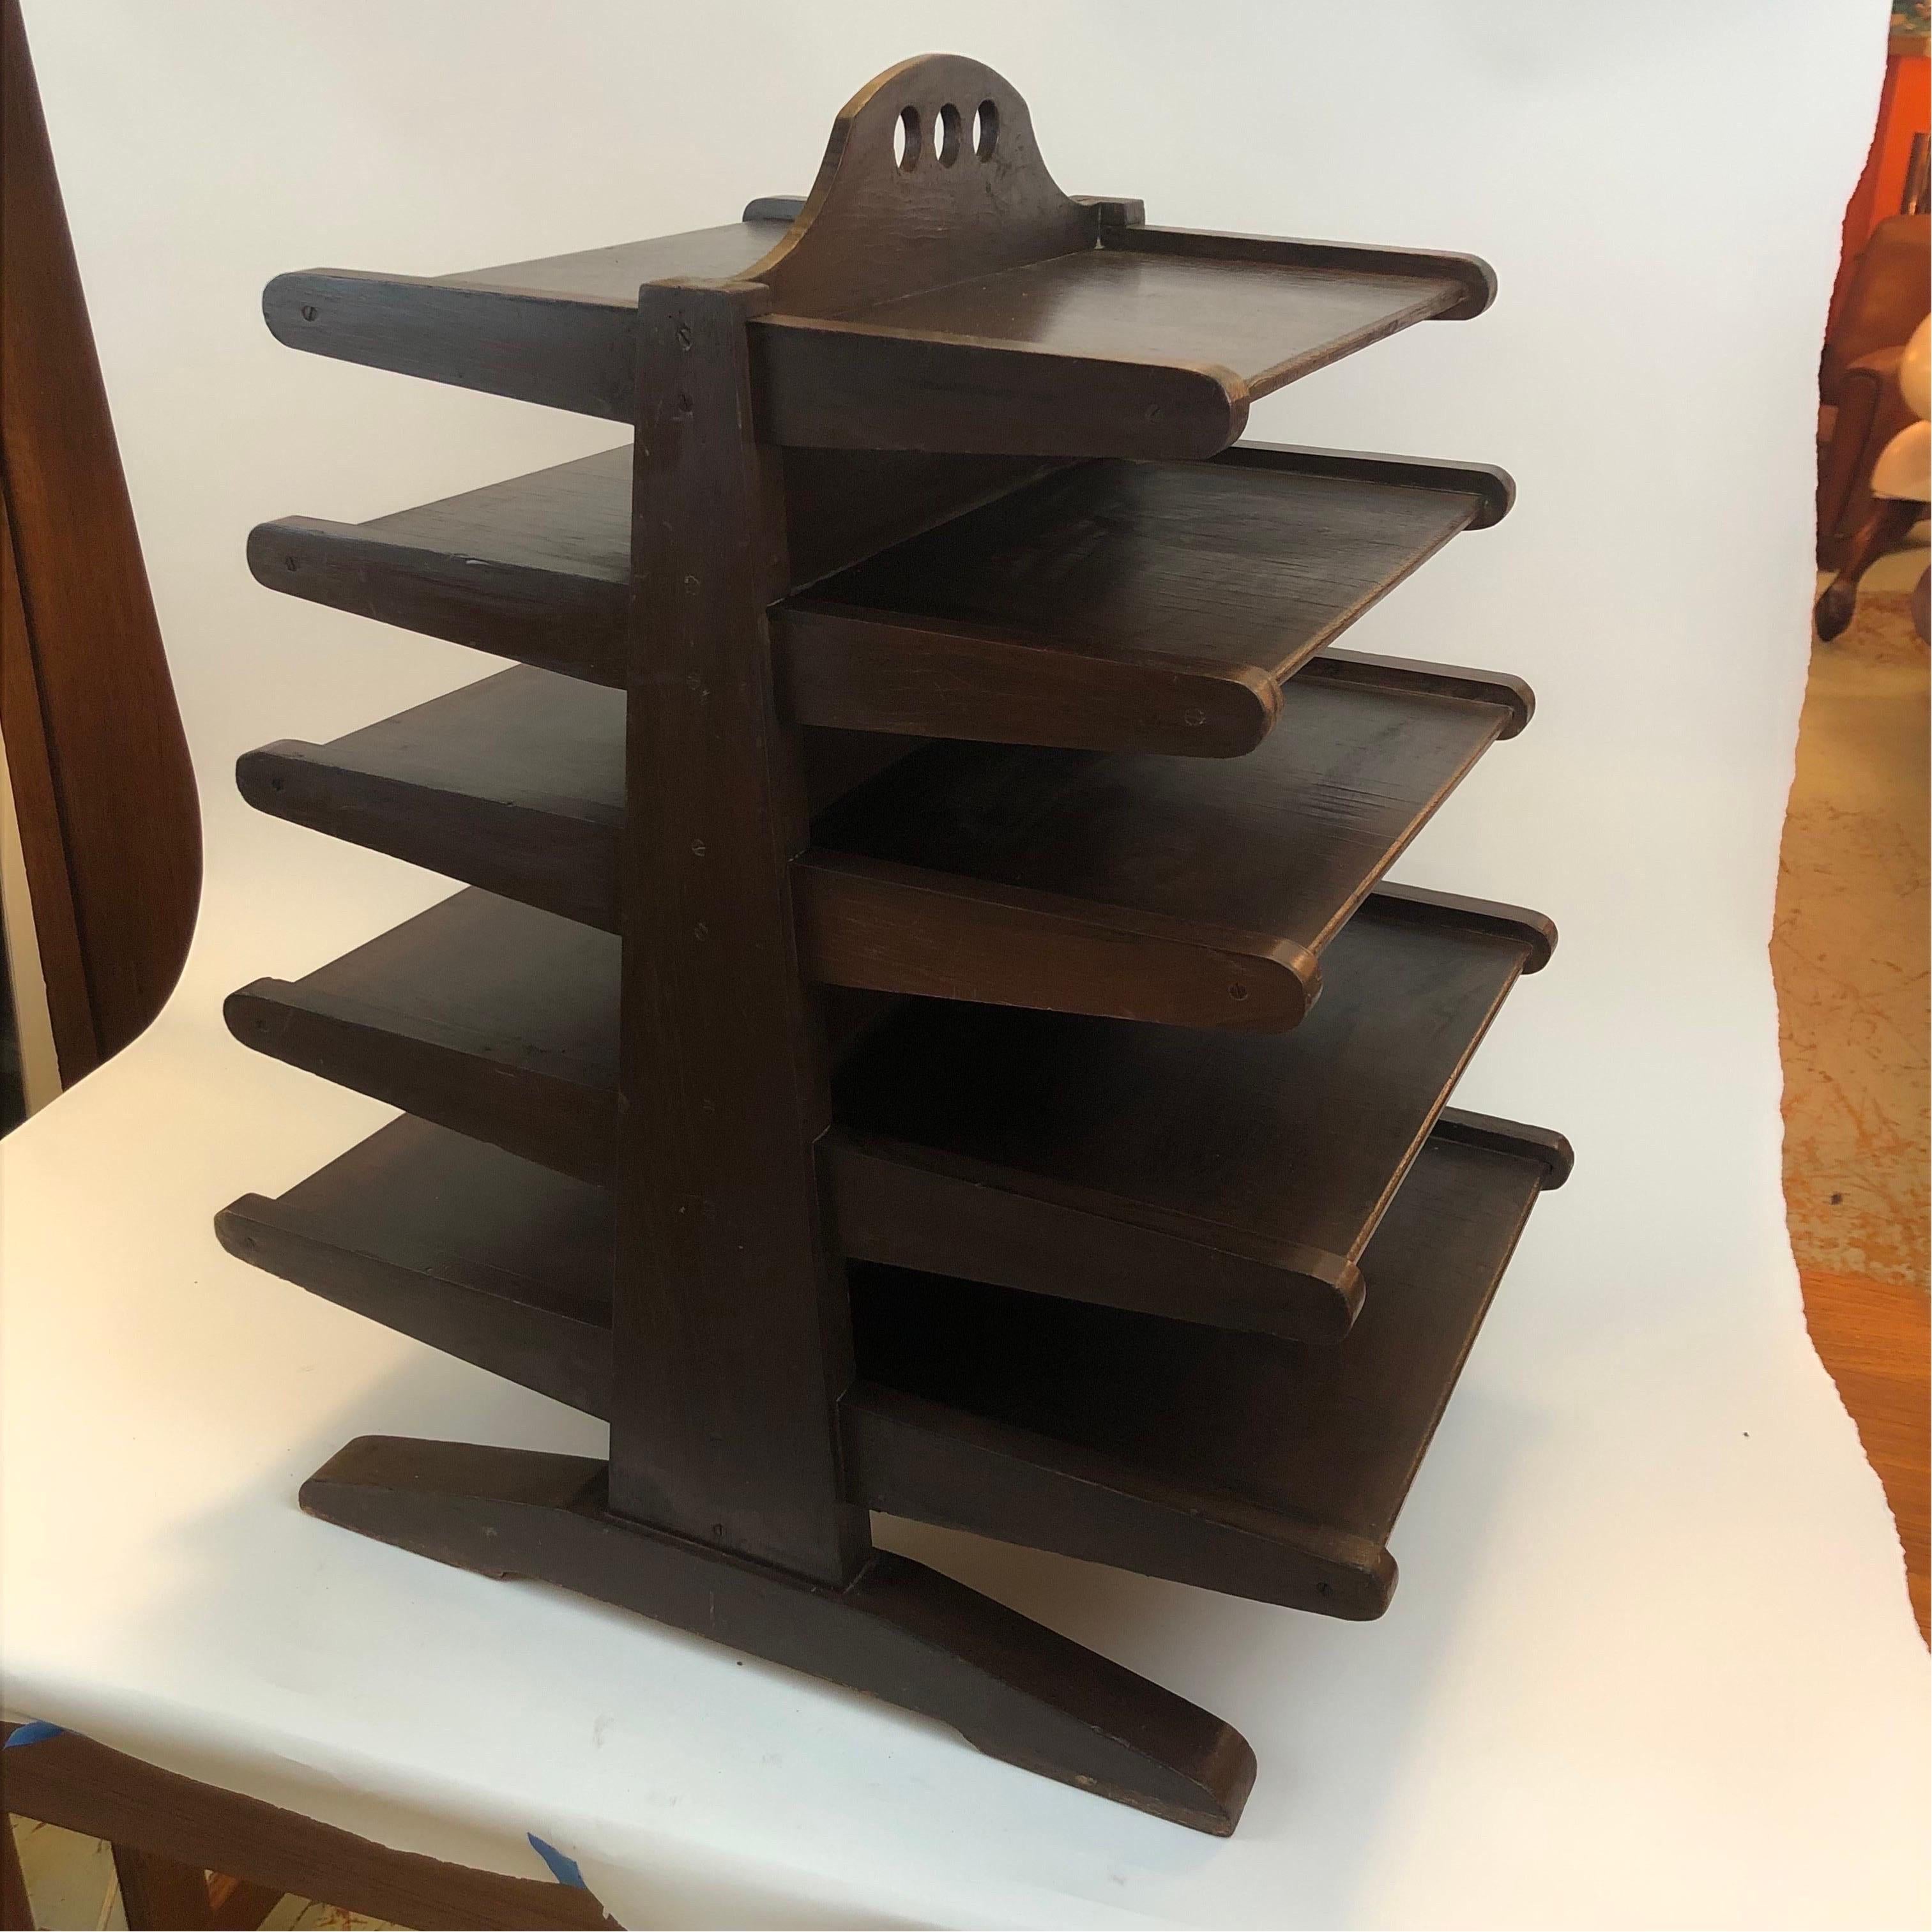 An of the period five tier DIY Dunbar Magazine tree in rustic original dark walnut stained wax finish, and taking heavy cues from the highly sought after Edward Wormley piece in similar form. Carpenters editorial decisions of note include a wide